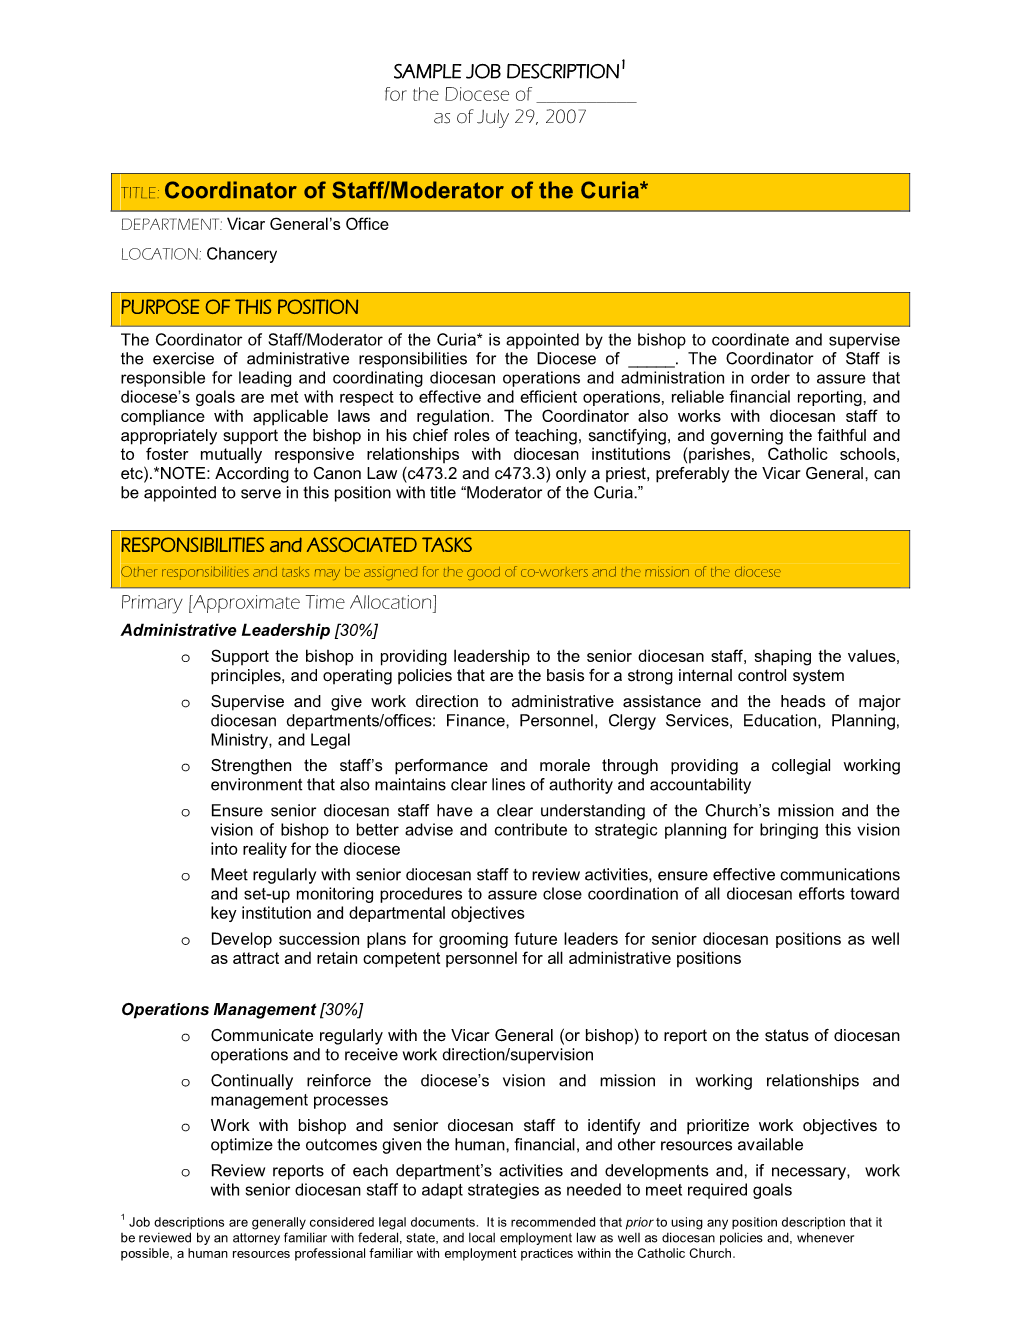 Coordinator of Staff/Moderator of the Curia* DEPARTMENT: Vicar General’S Office LOCATION: Chancery